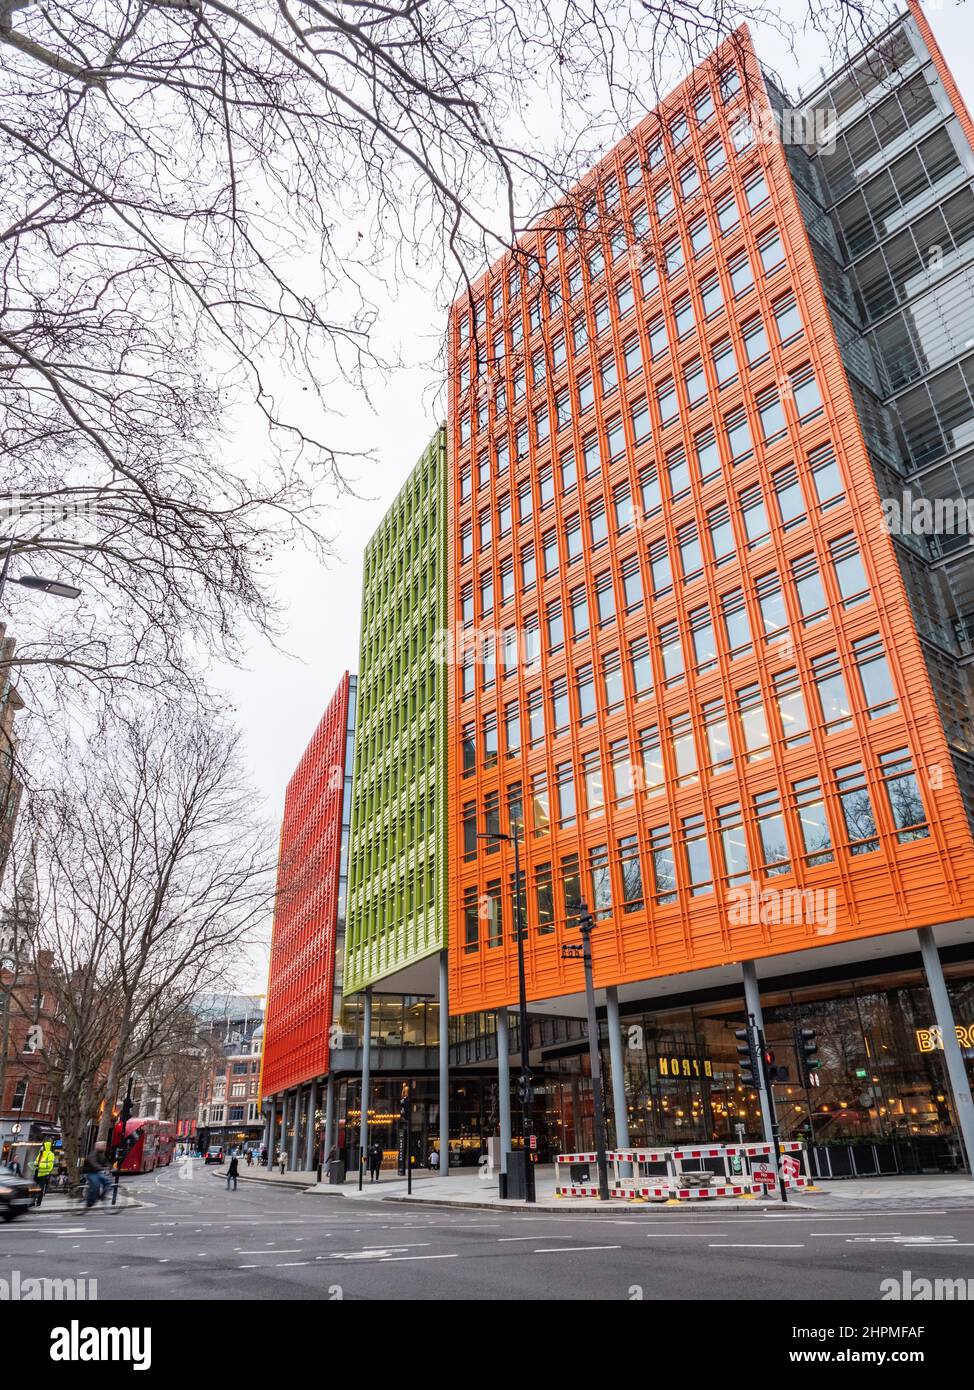 Google Headquarters, London. The brightly coloured offices of the modern Tech Giant's office buildings in central London. Stock Photo